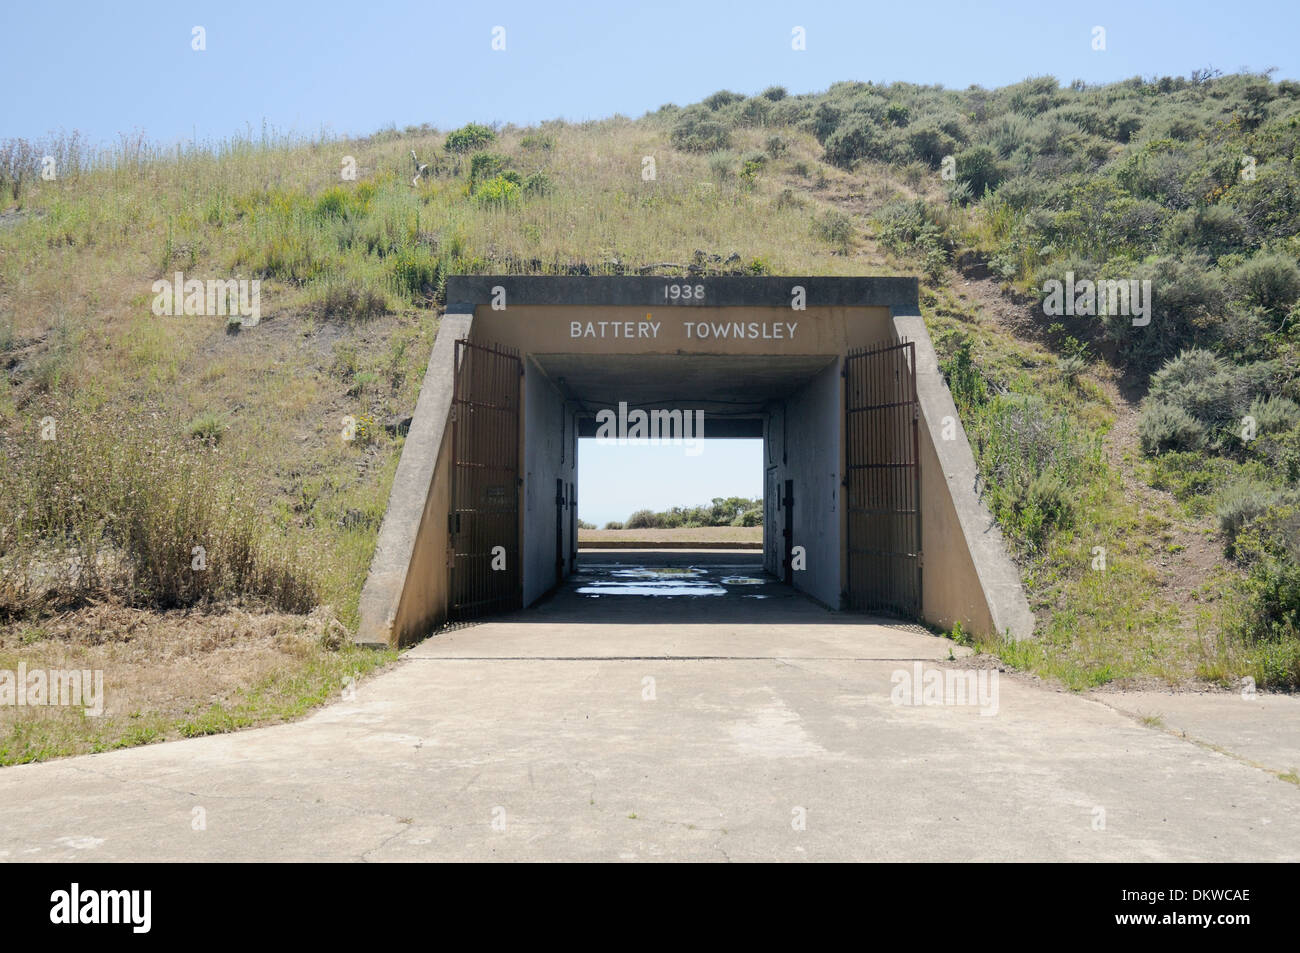 Battery Townsley at Former Nike Missile Site at Golden Gate National Recreation Area near San Francisco, California Stock Photo